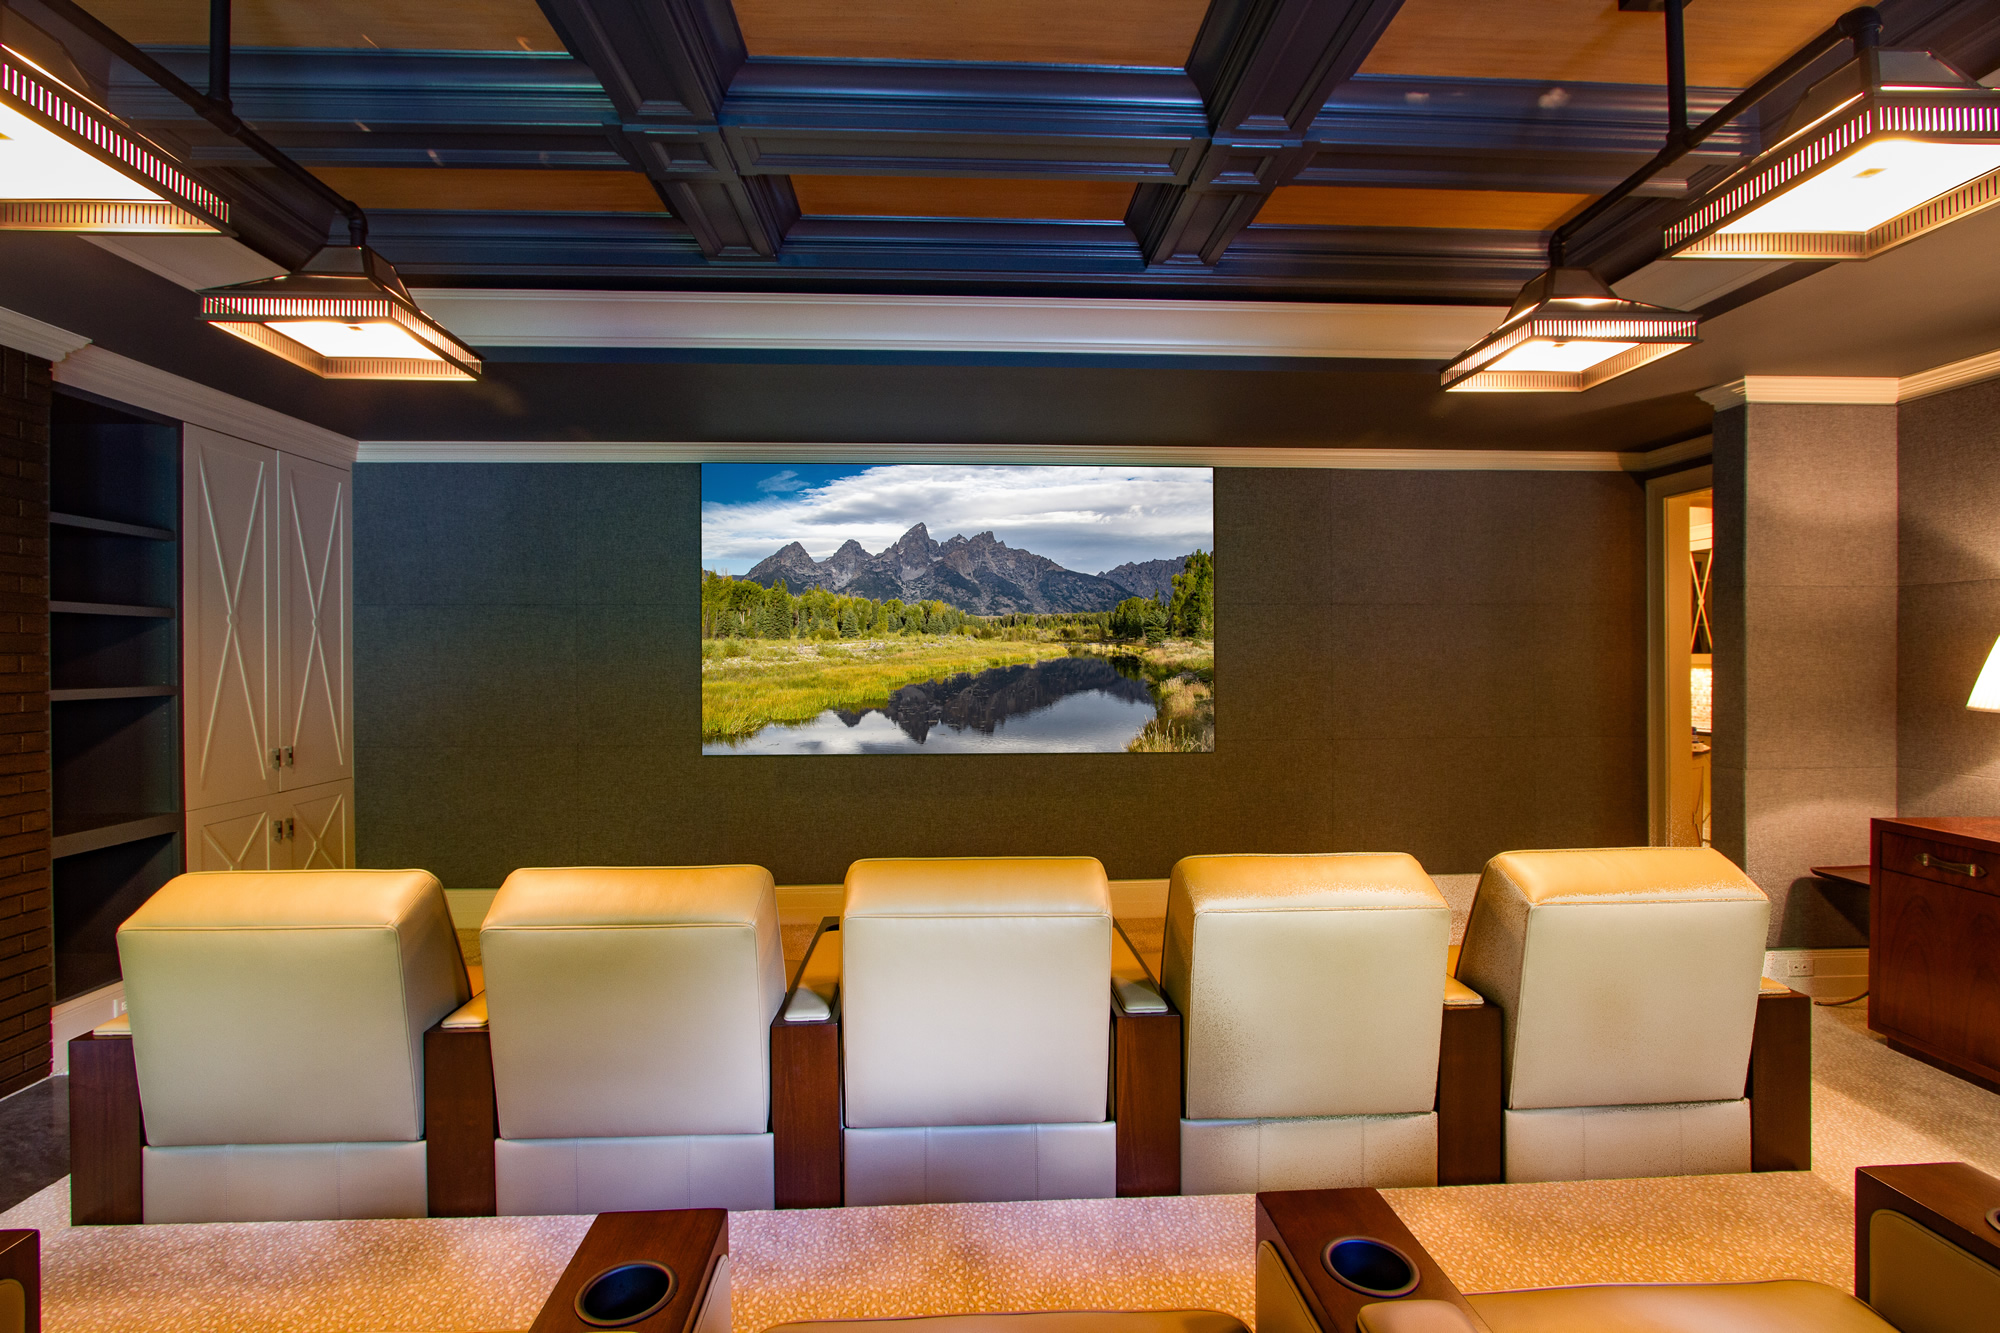 Fall Into the Magic of Home Theaters with Bravo AV's New Educational Series